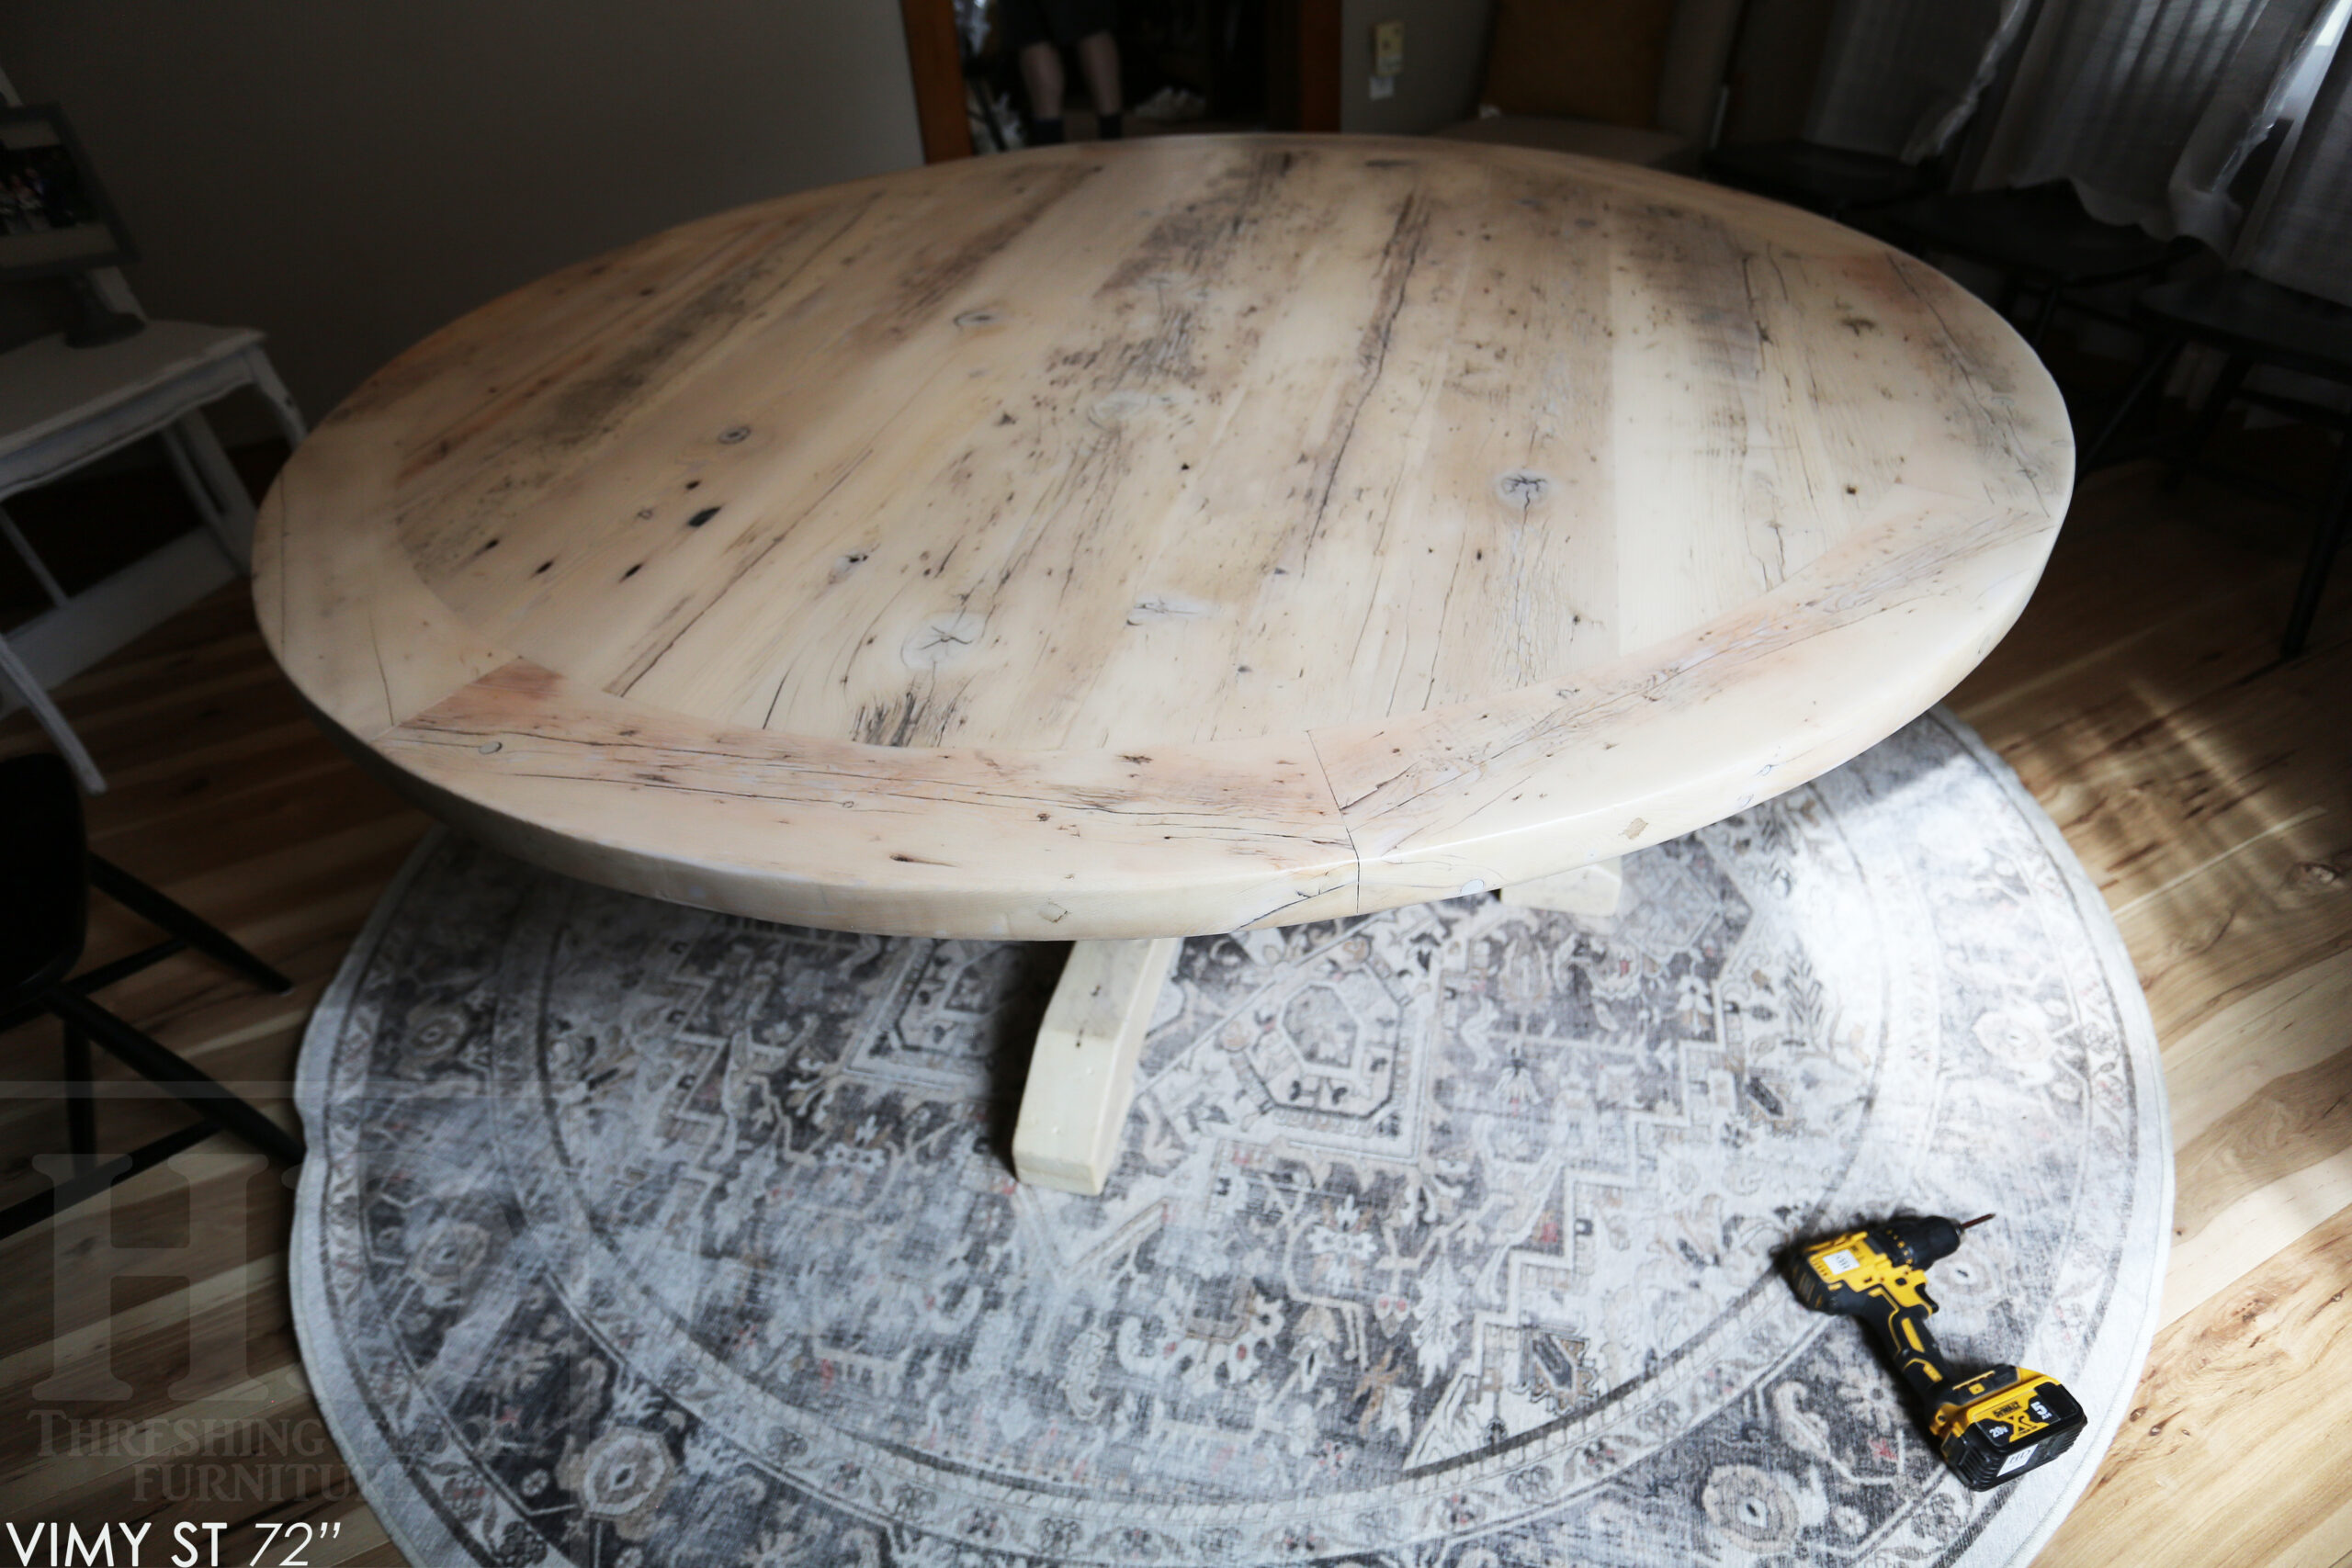 Project Summary: 72” Reclaimed Ontario Barnwood Round Table we made for a Cambridge, Ontario home – Hand Hewn Beam Pedestal Base - Old Growth Hemlock Threshing Floor Construction - Original edges & distressing maintained – Bread Edge Boards – Bleached Option - Premium epoxy + matte polyurethane finish - www.table.ca